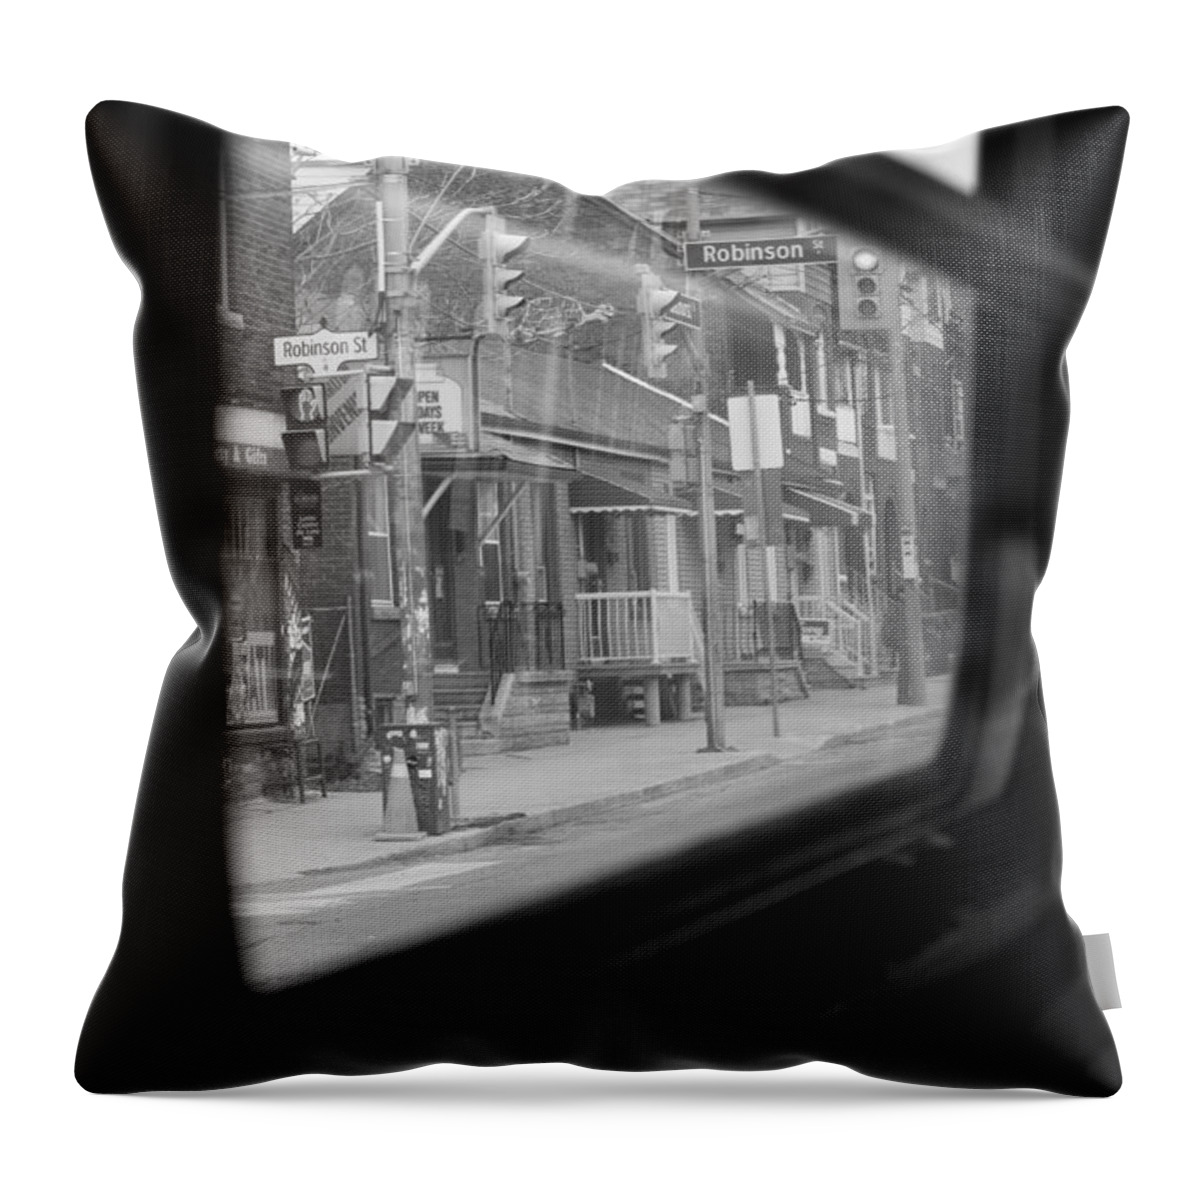 Art Print Throw Pillow featuring the photograph Robinson Street by Nicky Jameson